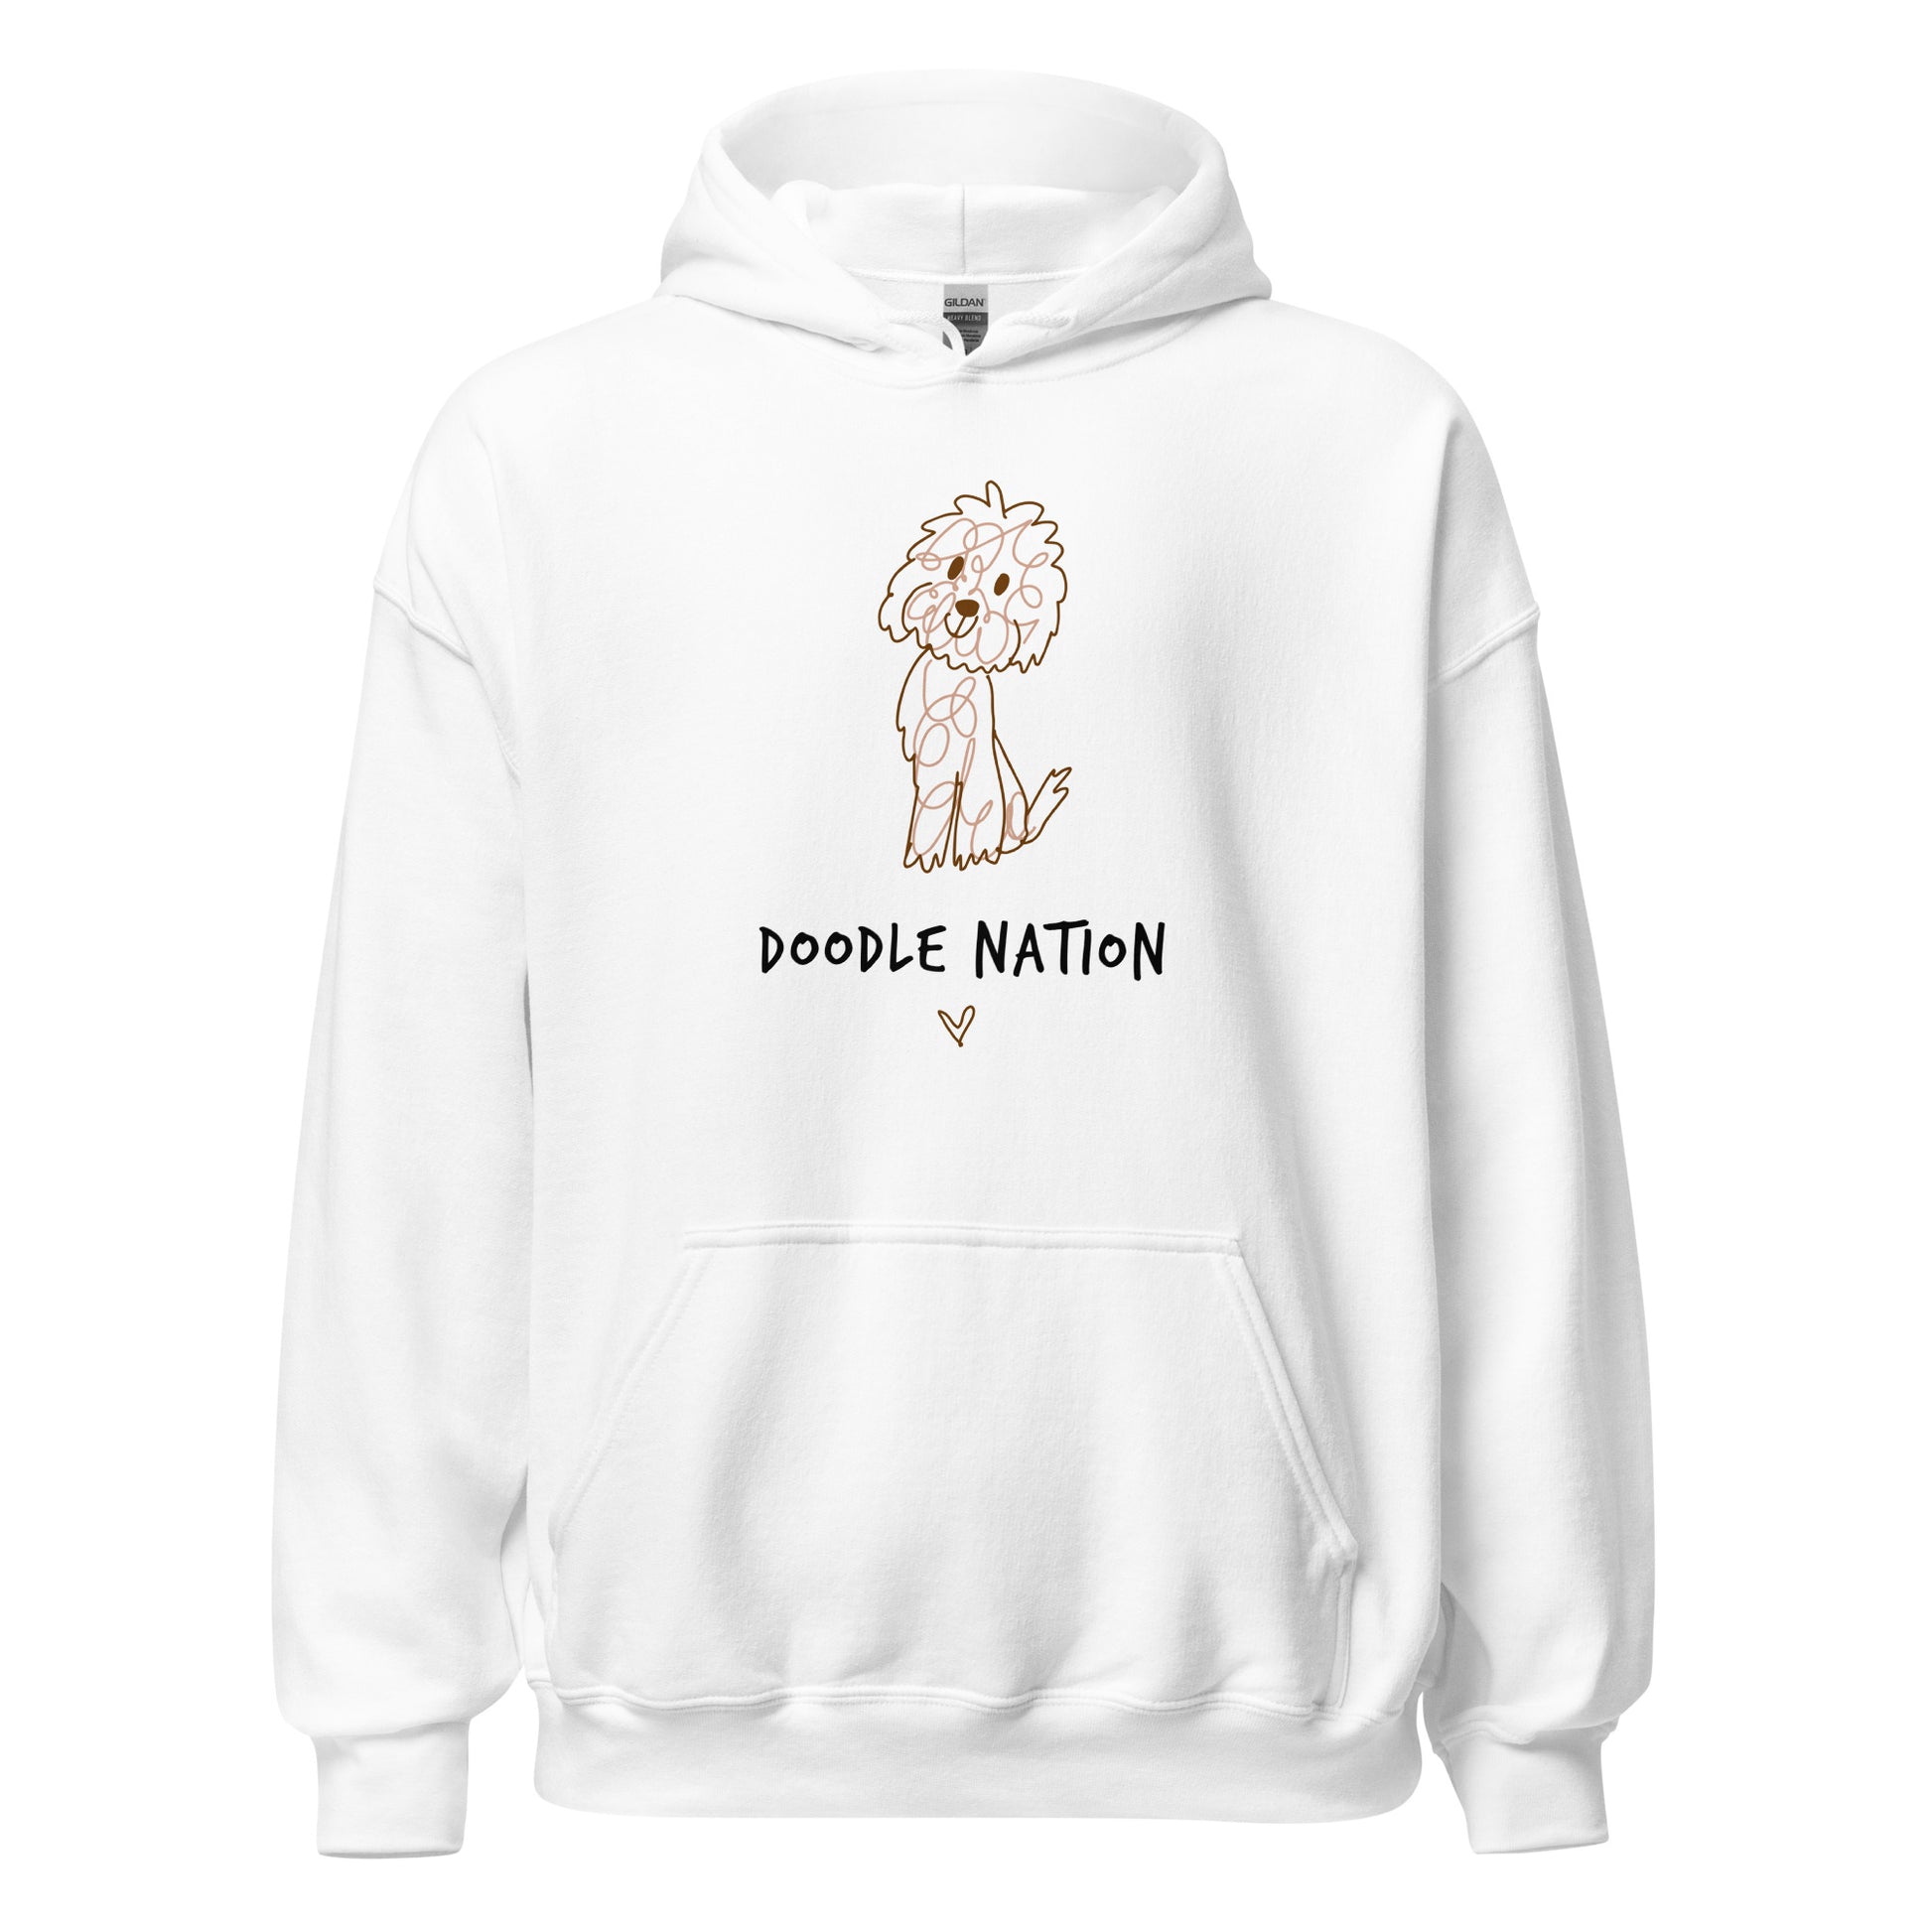 White hoodie with hand drawn dog design and saying Doodle Nation